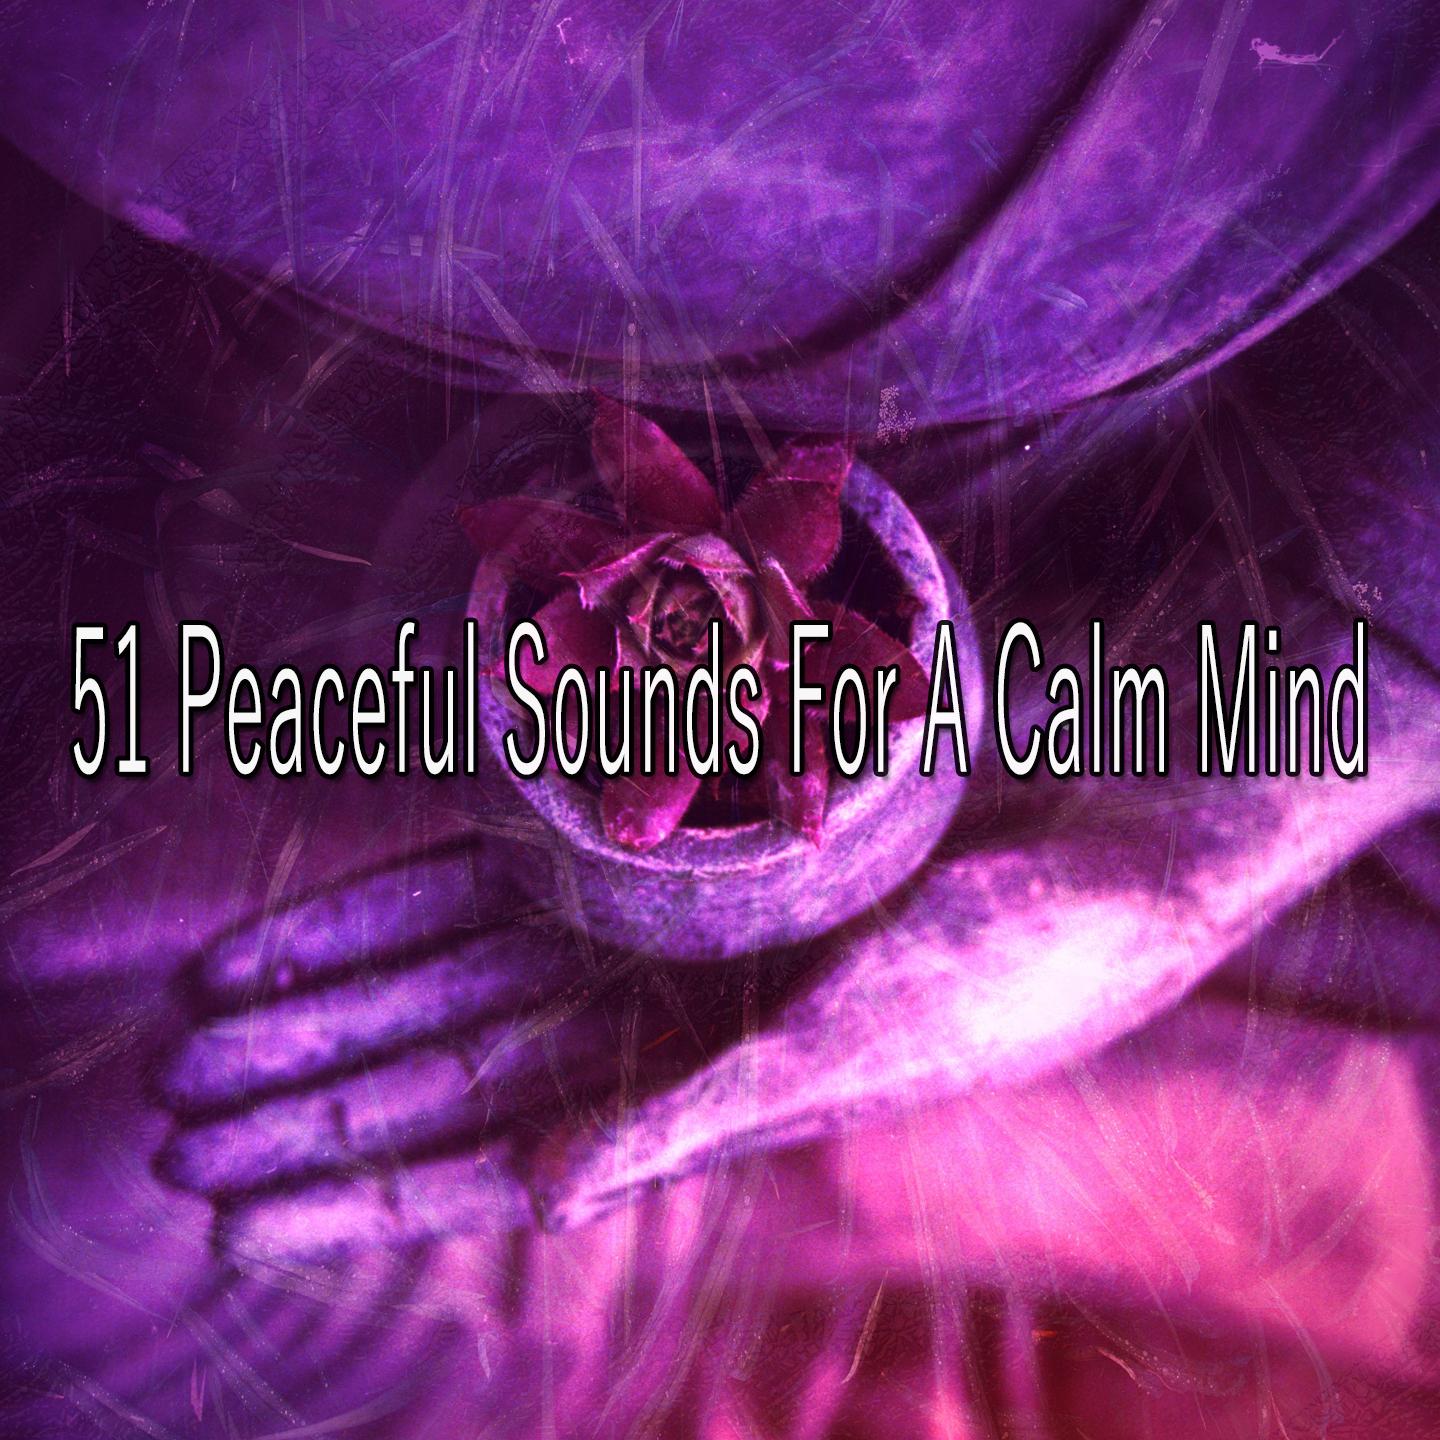 51 Peaceful Sounds for a Calm Mind